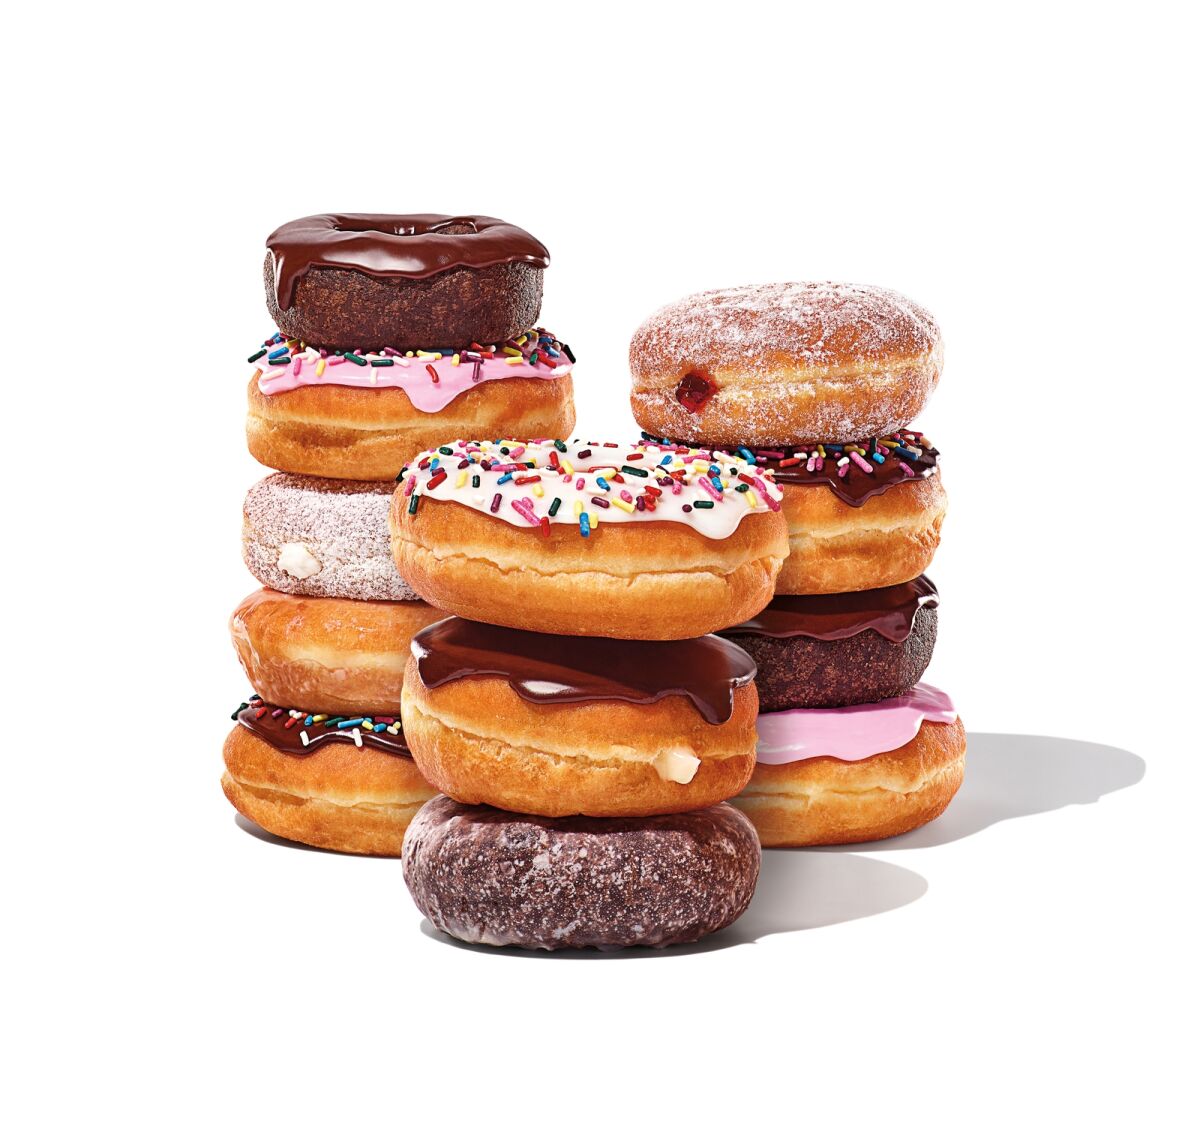 Dunkin' is offering free donuts on National Donut Day.